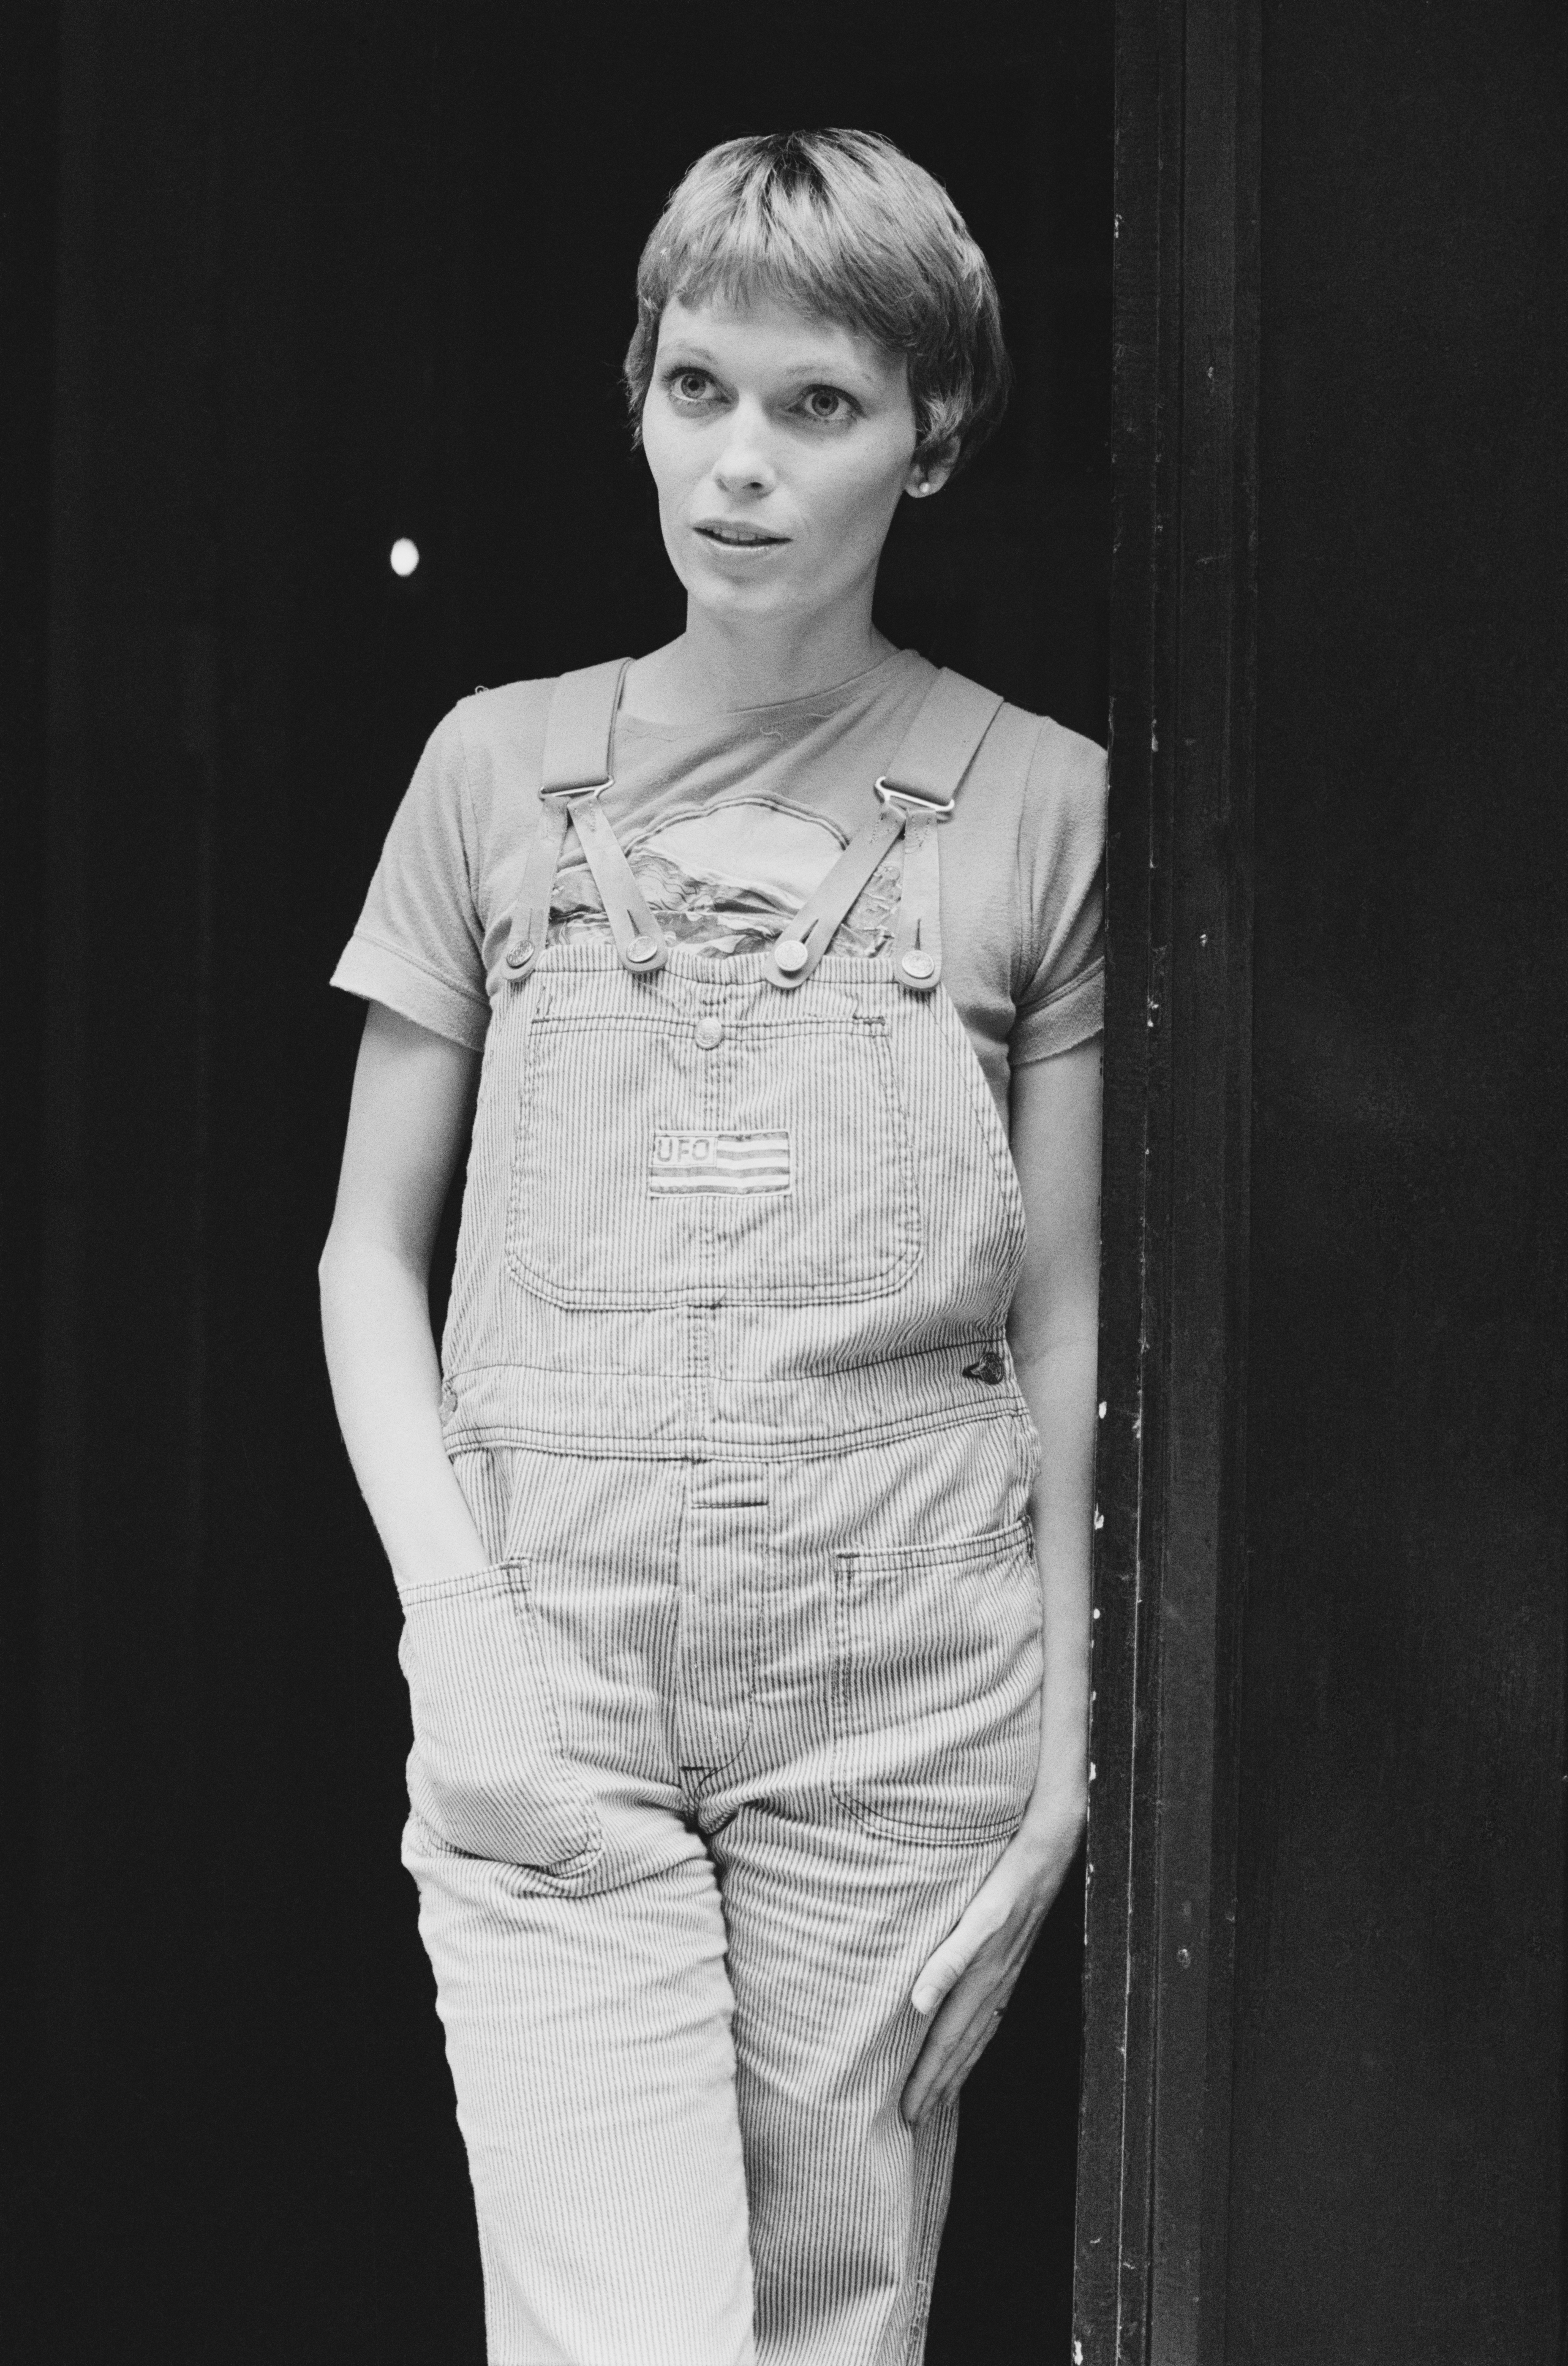 Close-up of a younger Mia in overalls and shirt